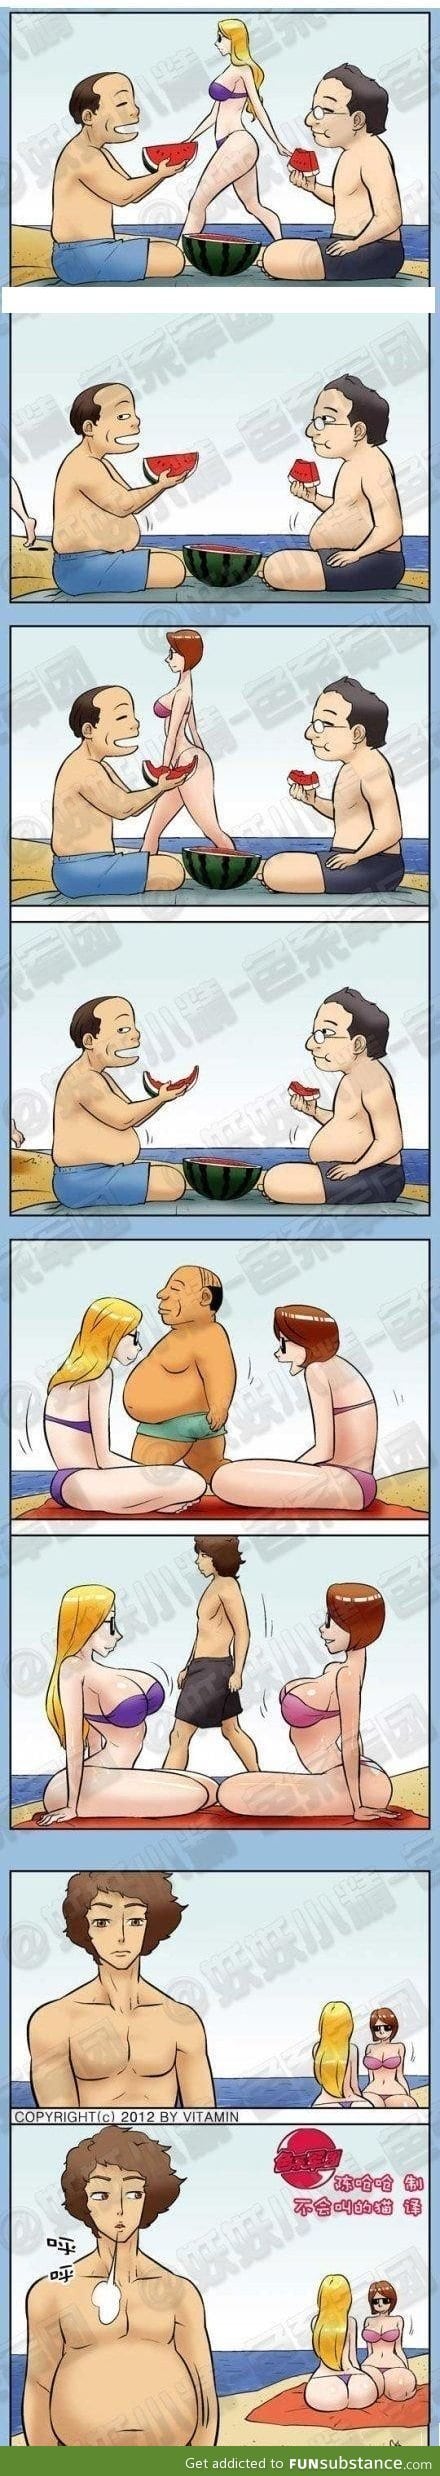 The truth of body figures